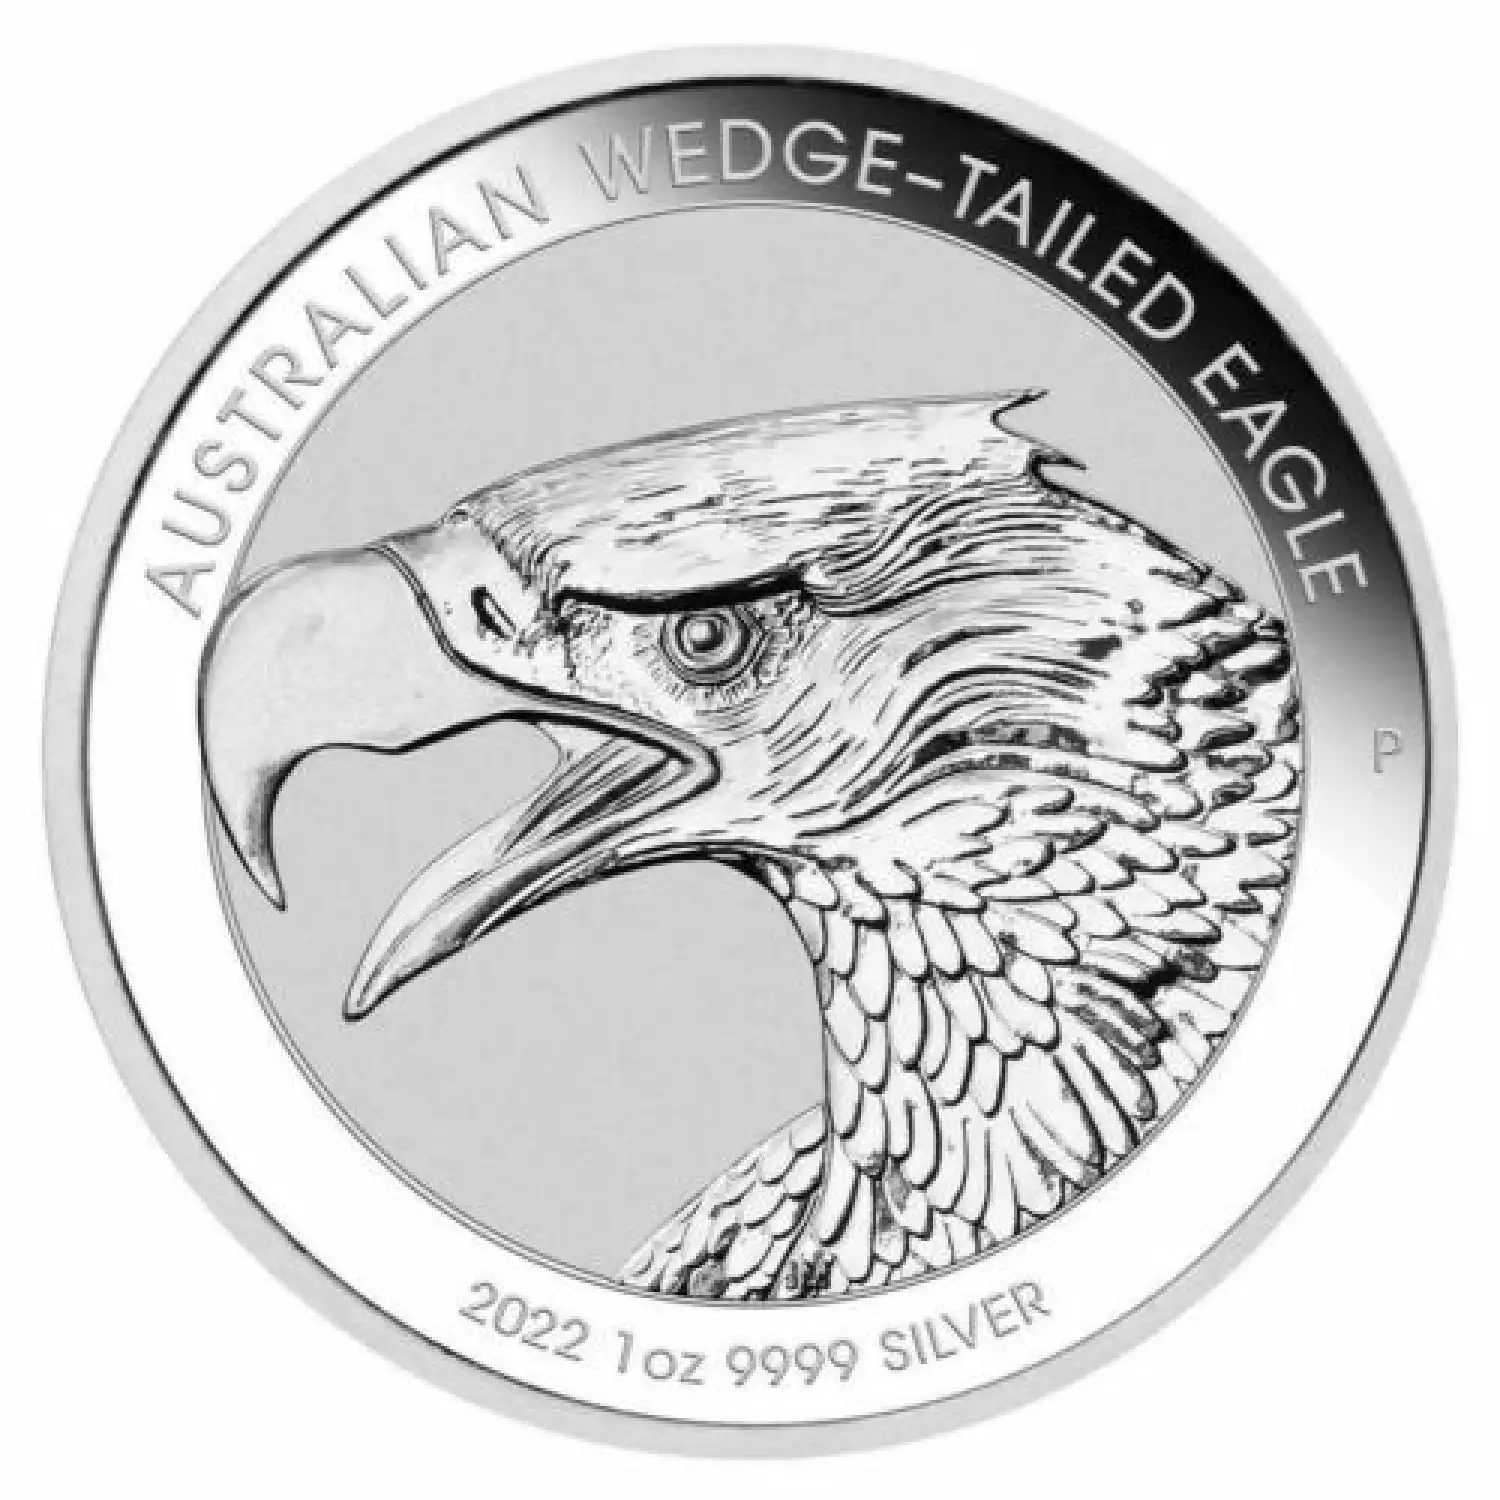 Any Year 1oz Australian Perth Mint Silver Wedge Tailed Eagle (2)